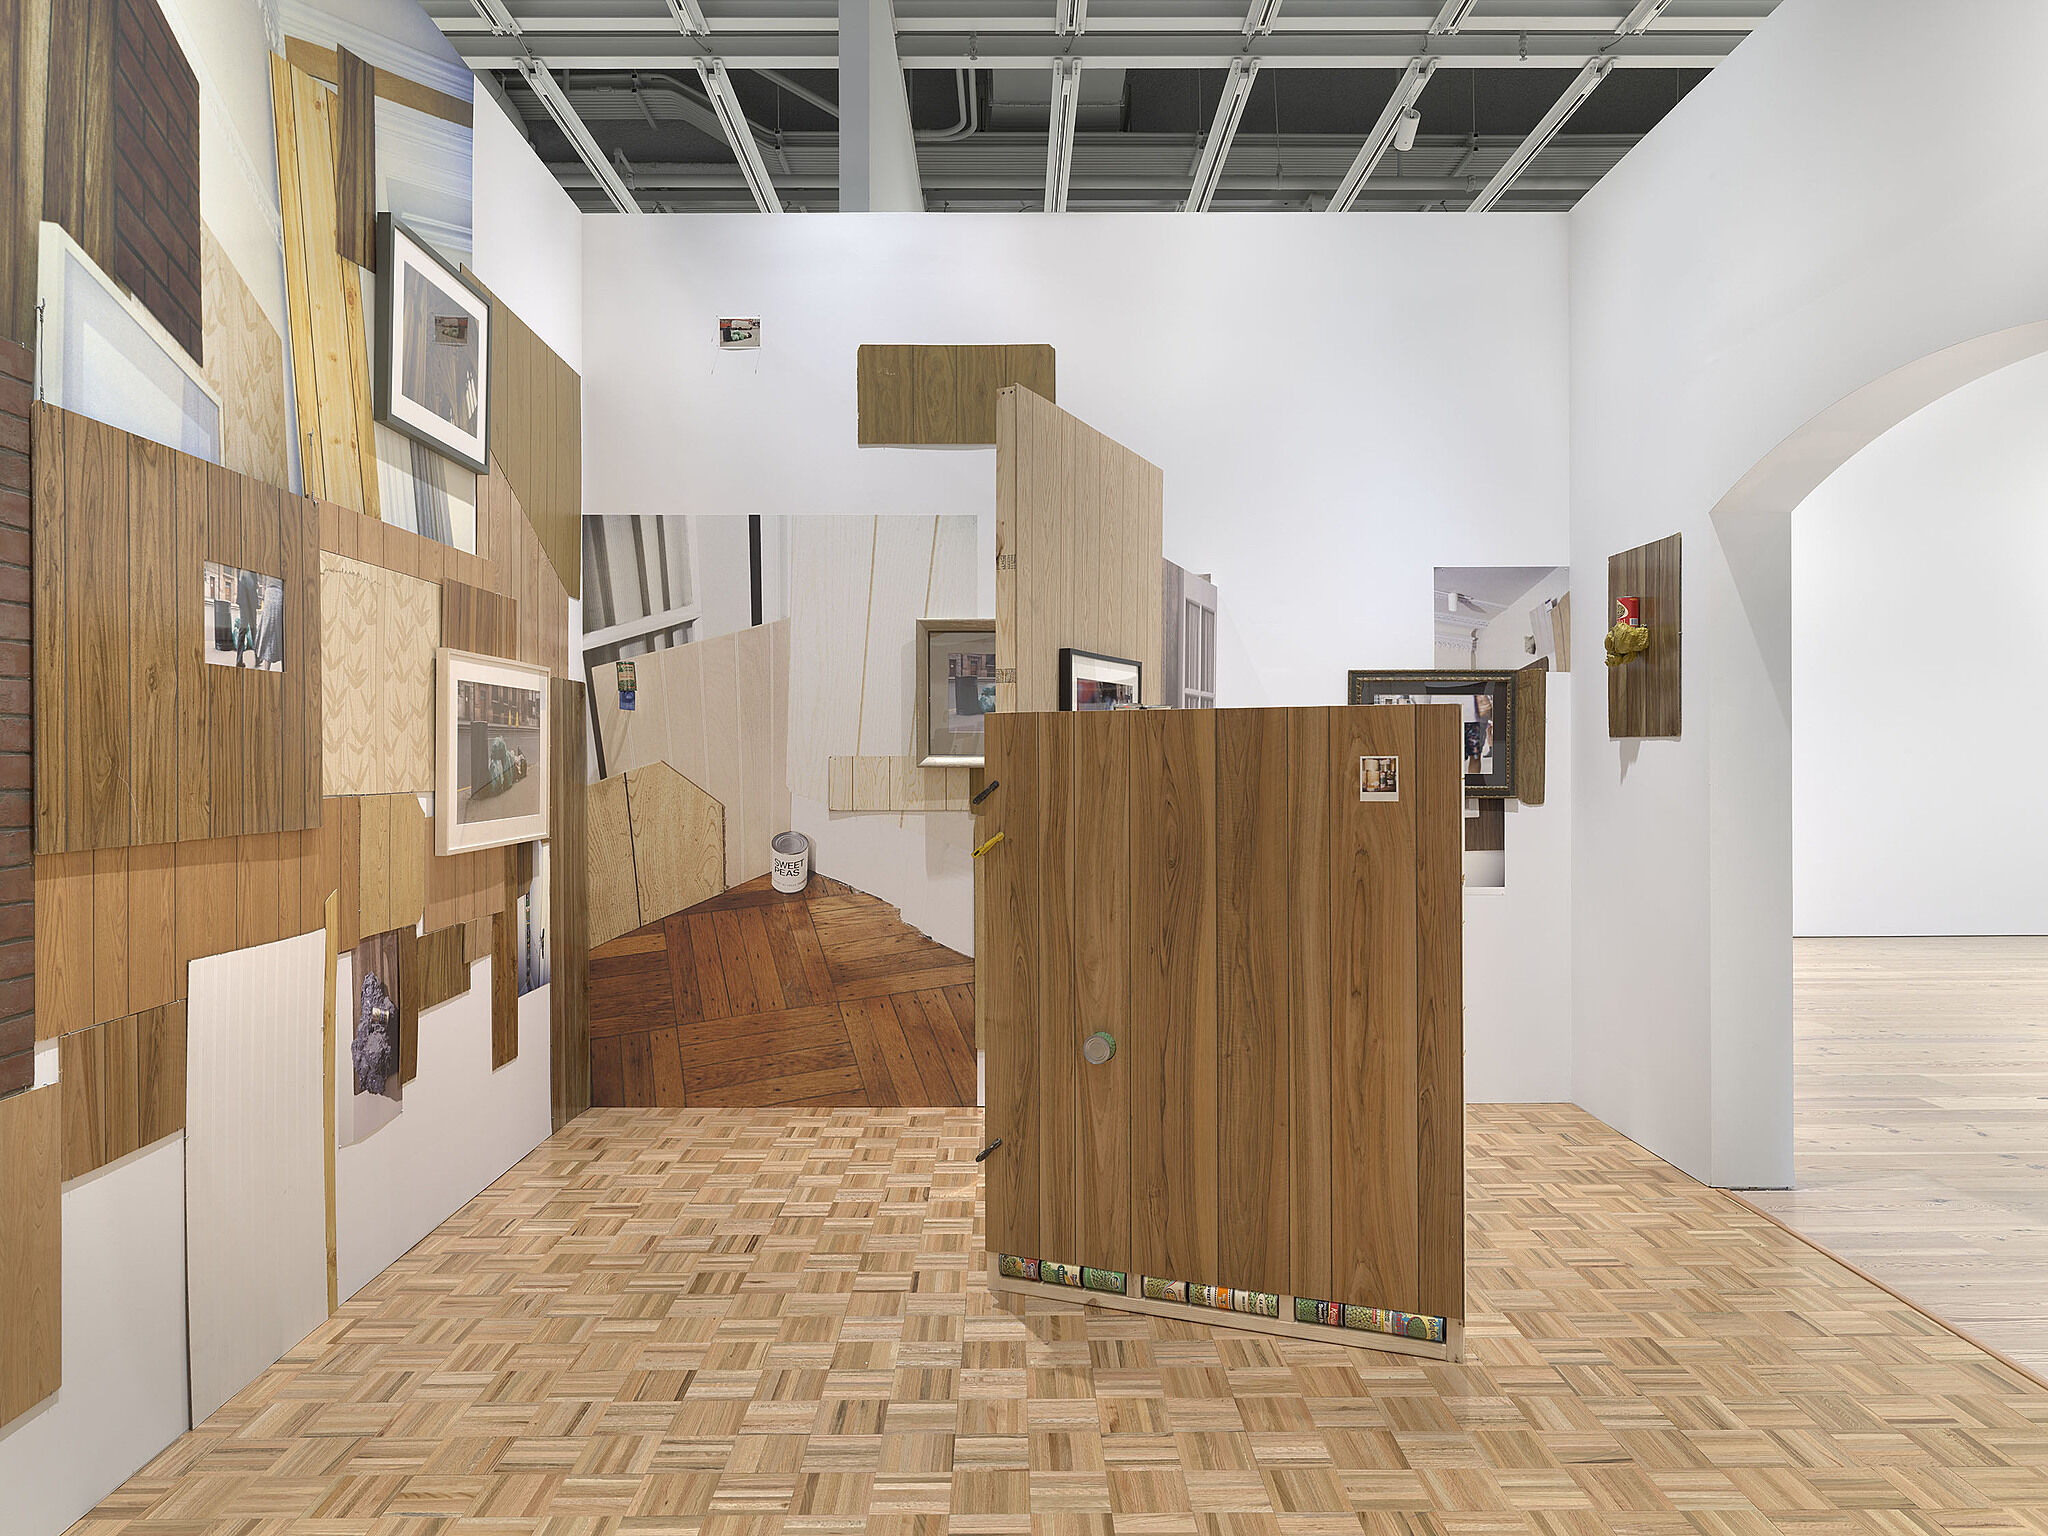 A gallery with fake wood walls, large photographs, and cans of peas.